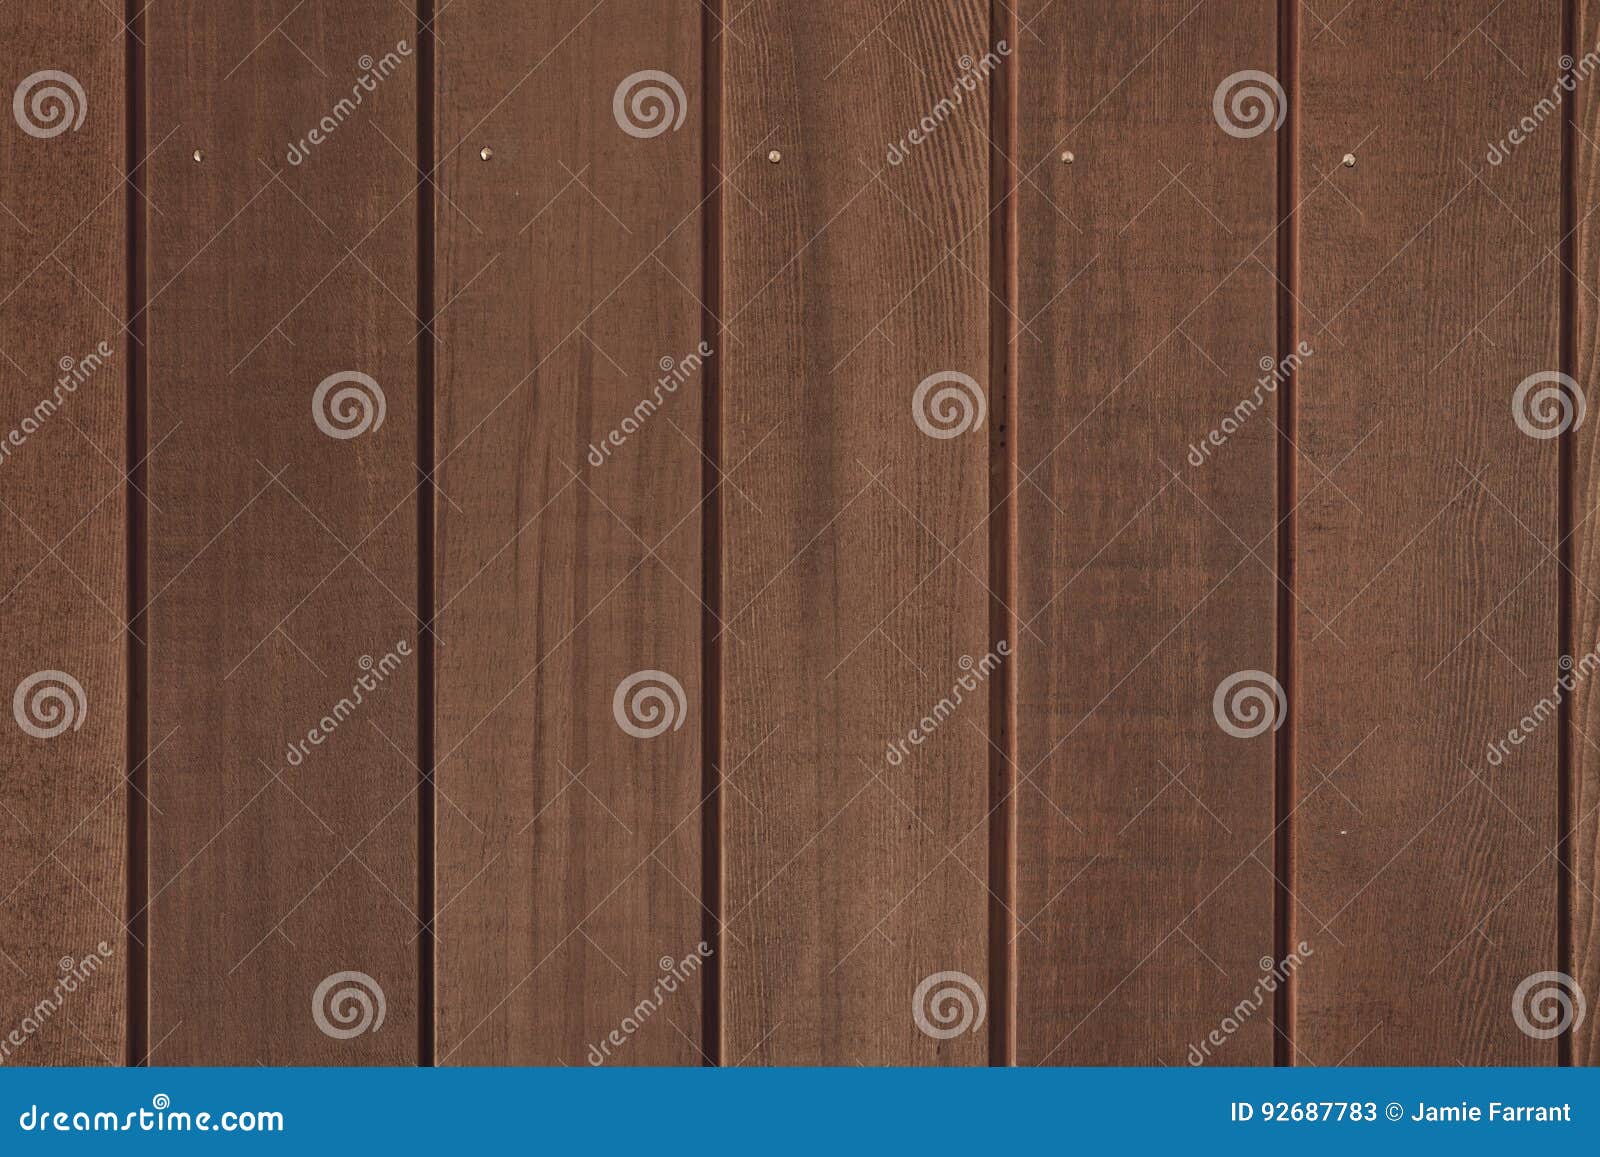 Cedar Wooden Wall Background Stock Image Image Of Wall